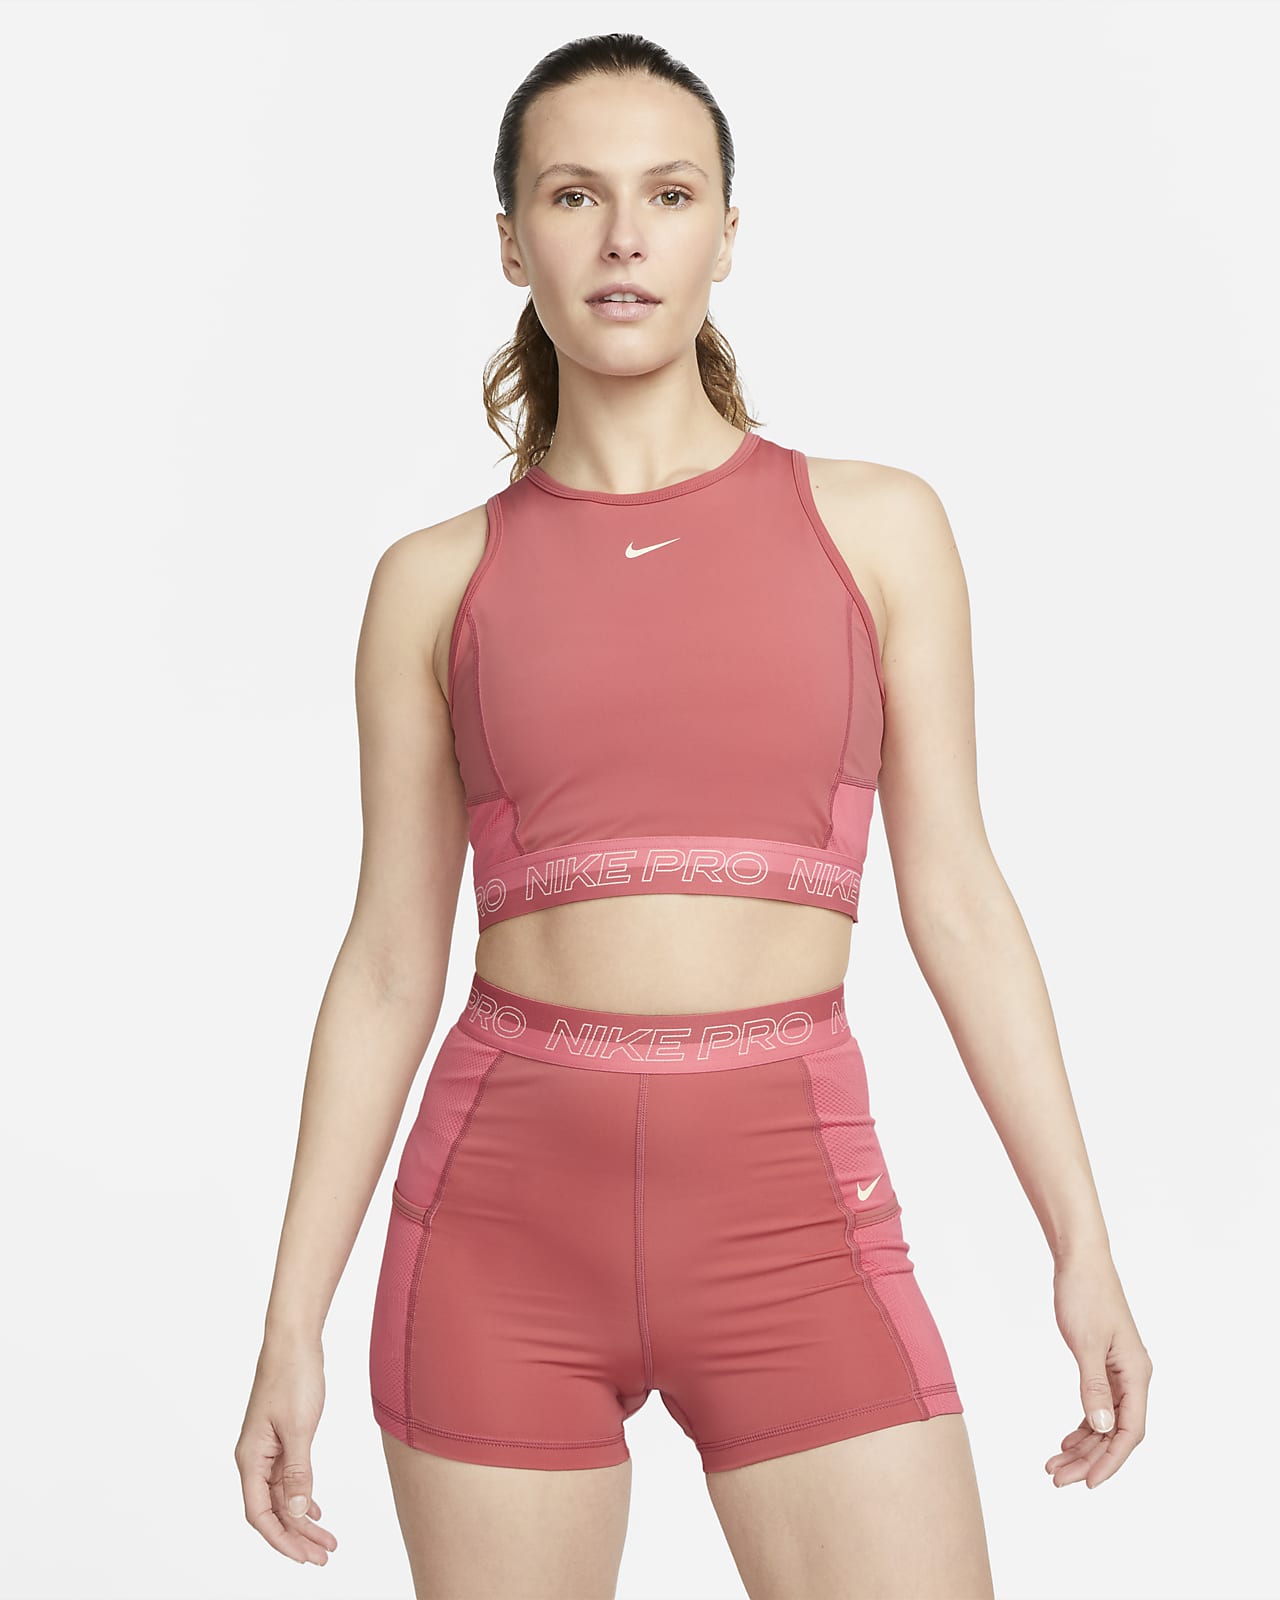 Contractie achter ongeduldig Nike Pro Dri-FIT Women's Cropped Training Tank Top. Nike ID